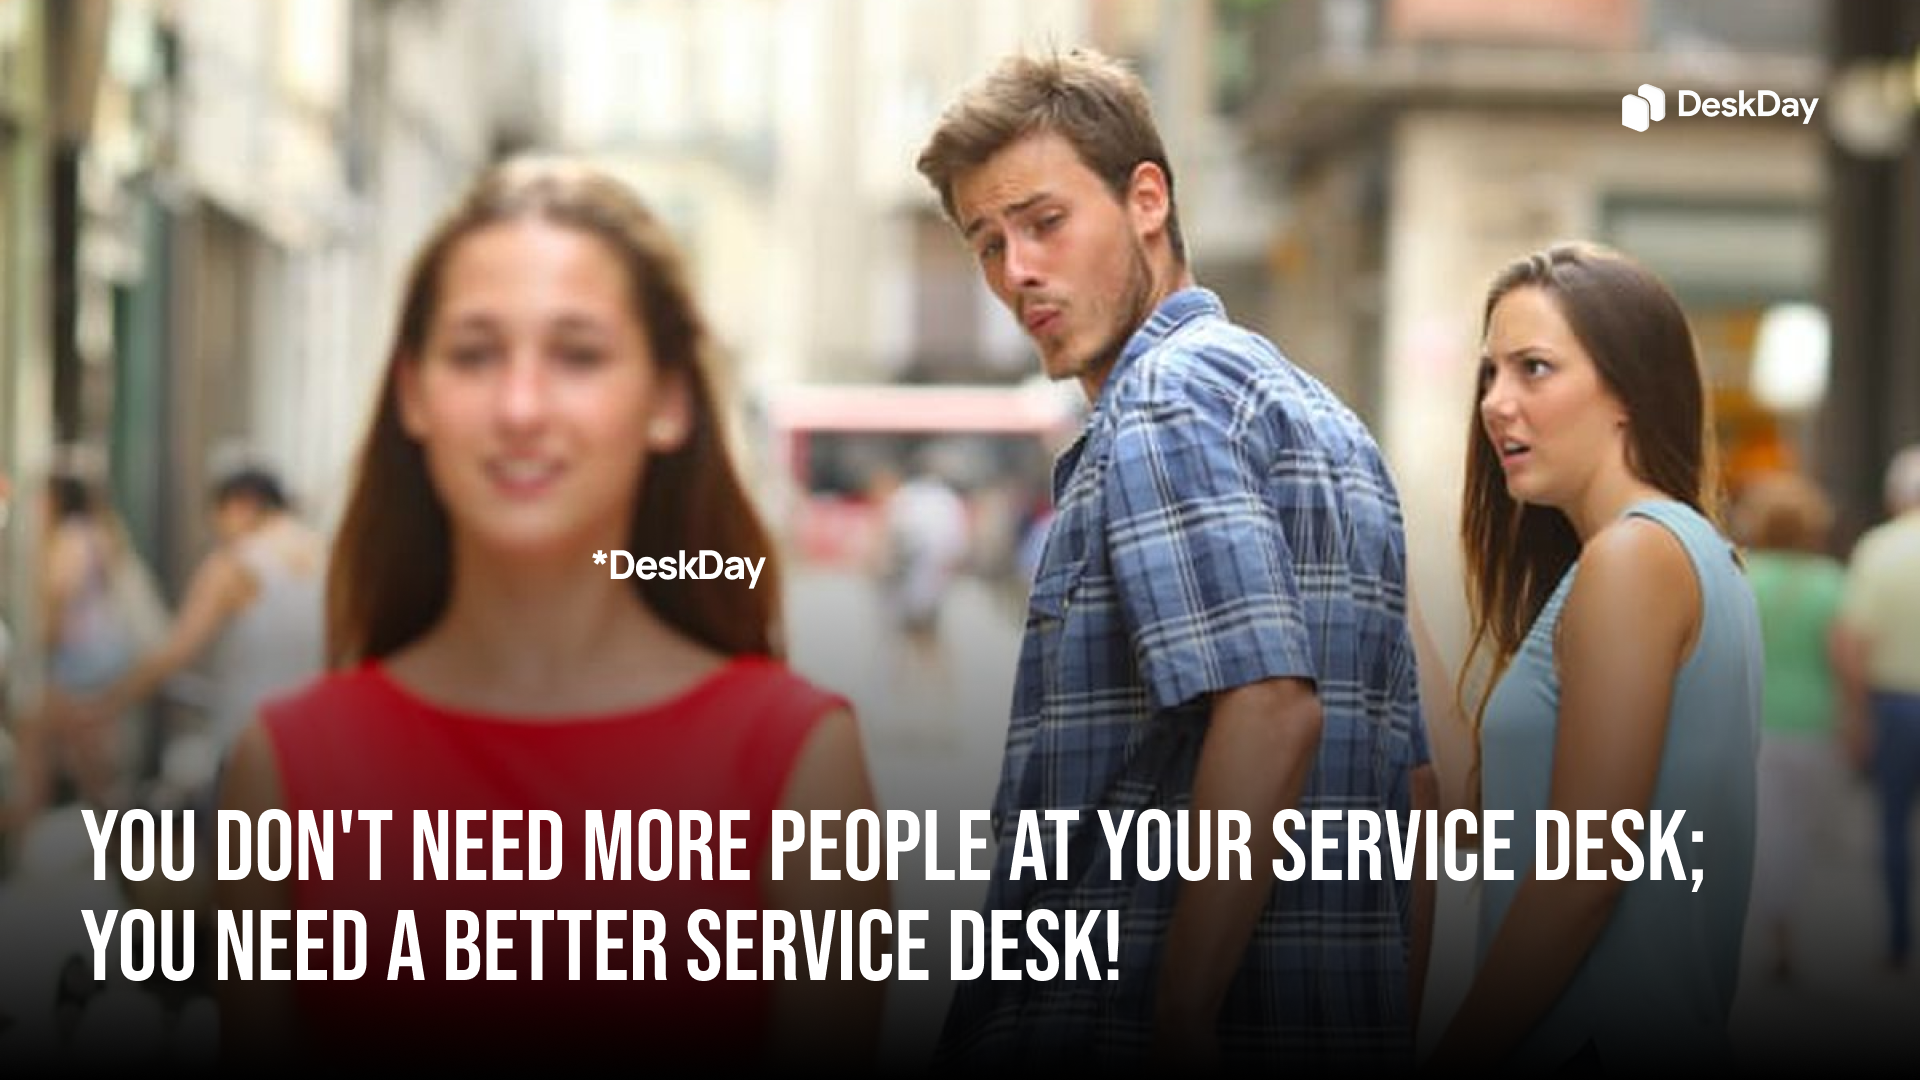 You don't need more people at your service desk; you need a better service desk!